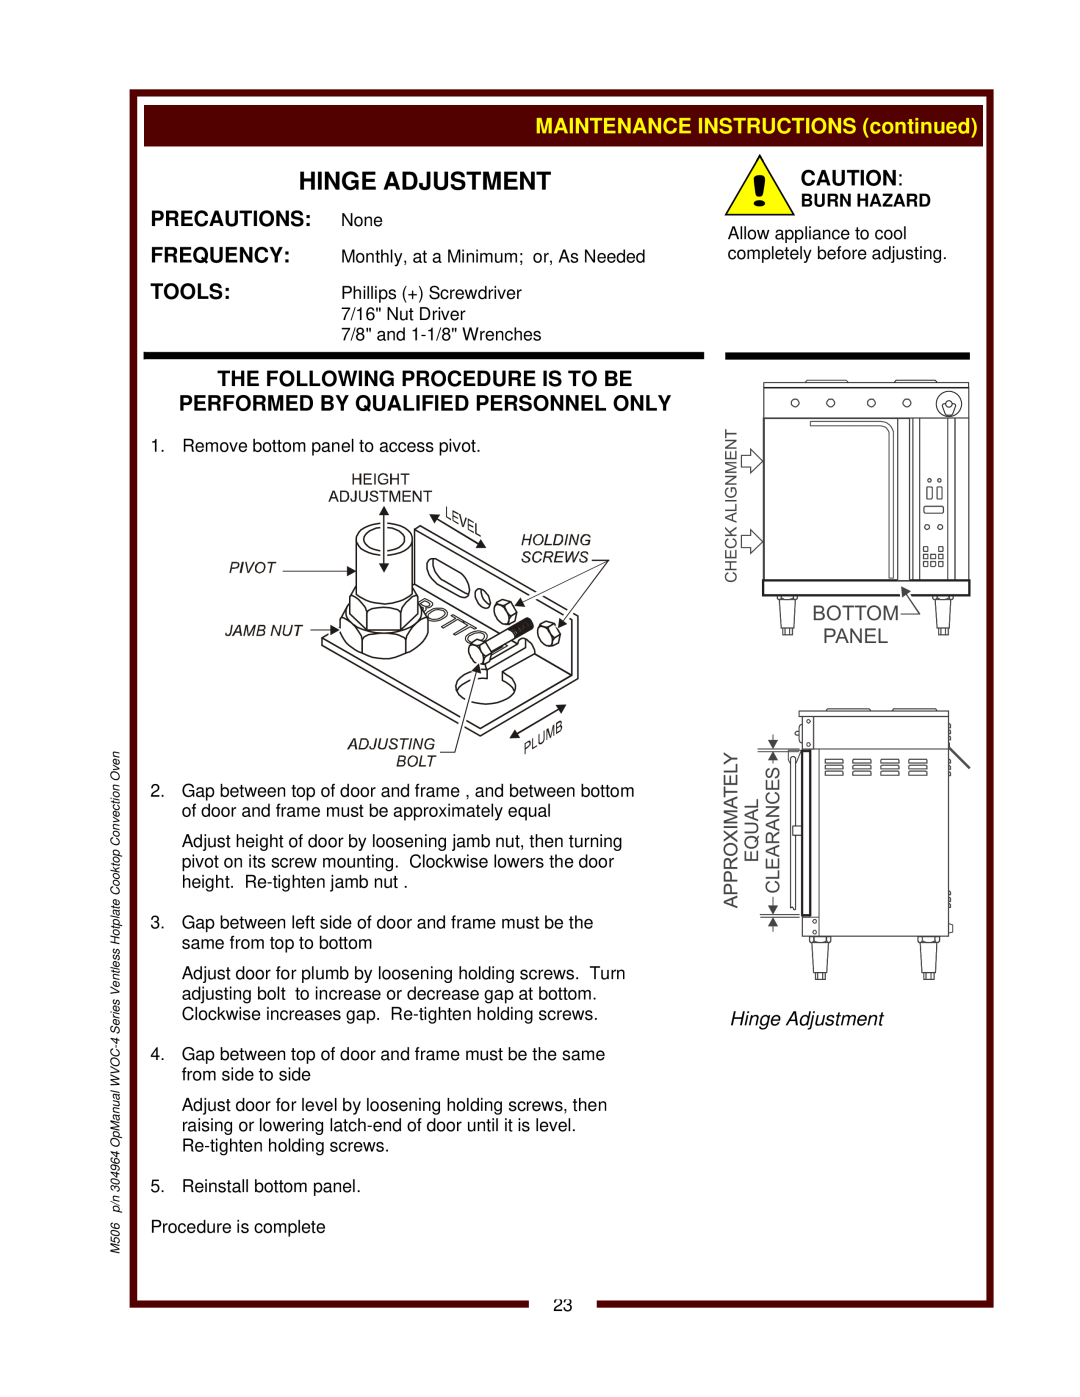 Wells WVOC-4HS Hinge Adjustment, The Following Procedure Is To Be, Performed By Qualified Personnel Only, Precautions 